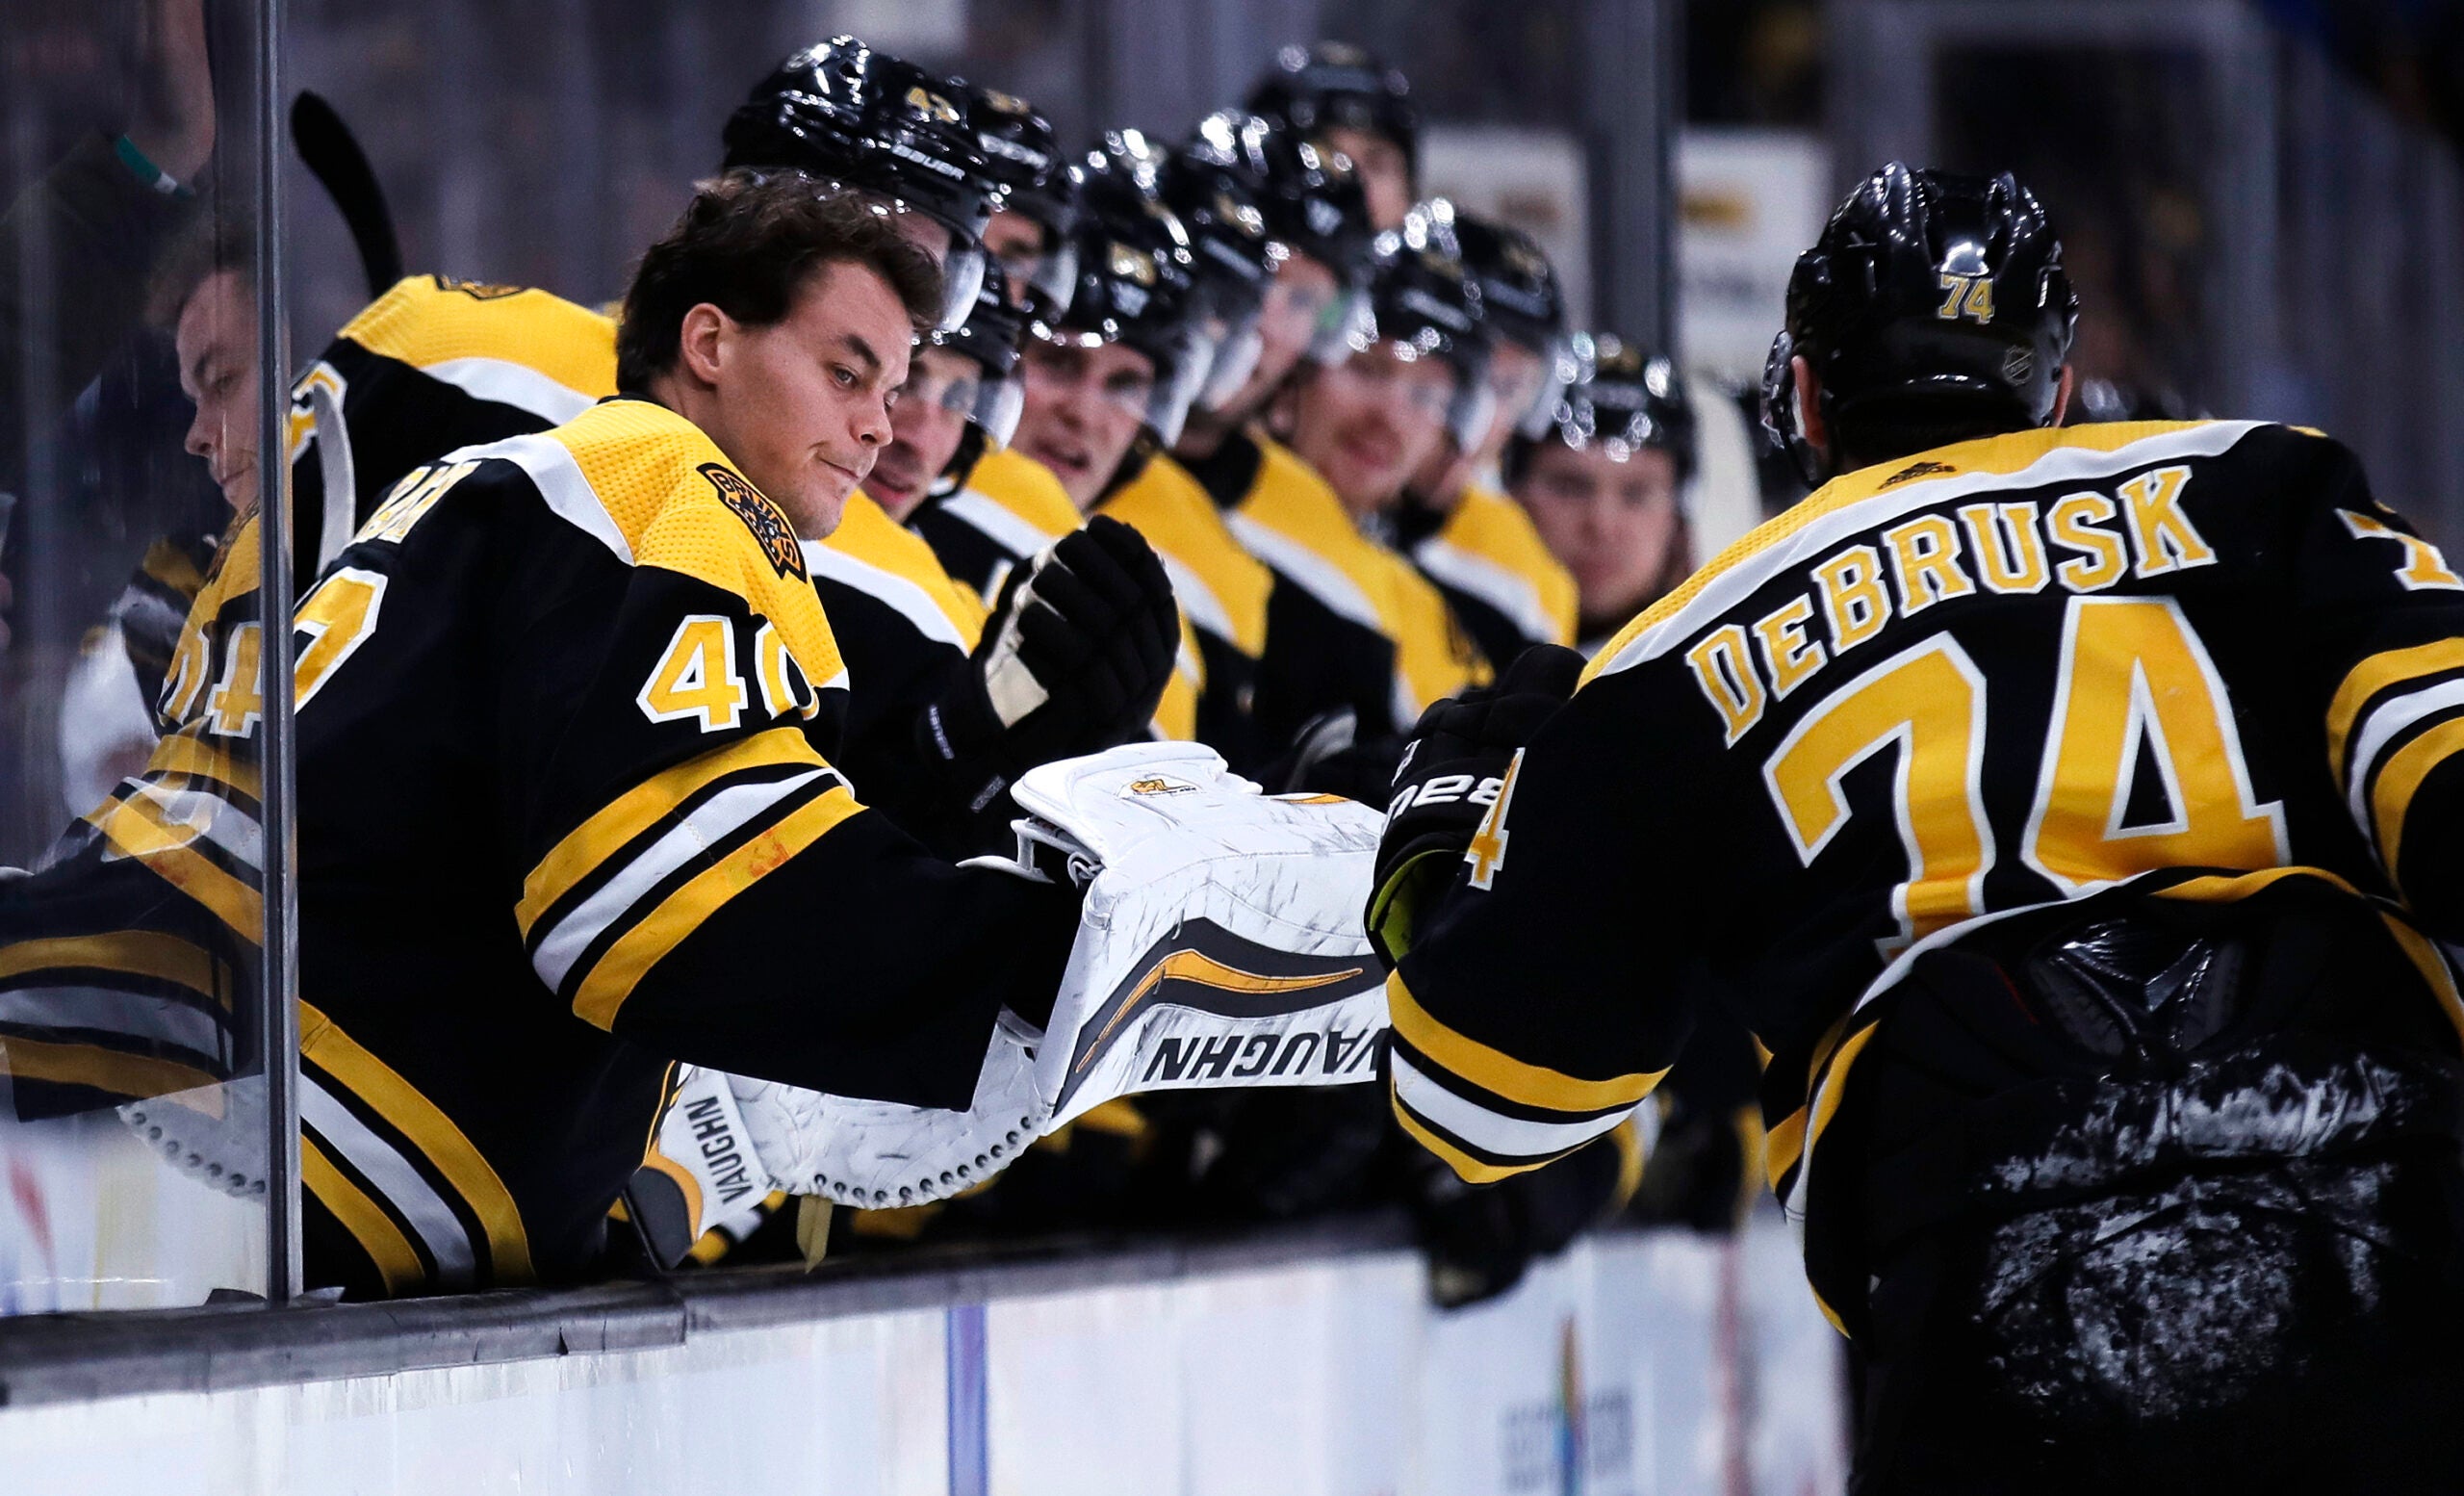 NESN analyst Billy Jaffe on what to watch for as the Bruins approach the Stanley Cup playoffs